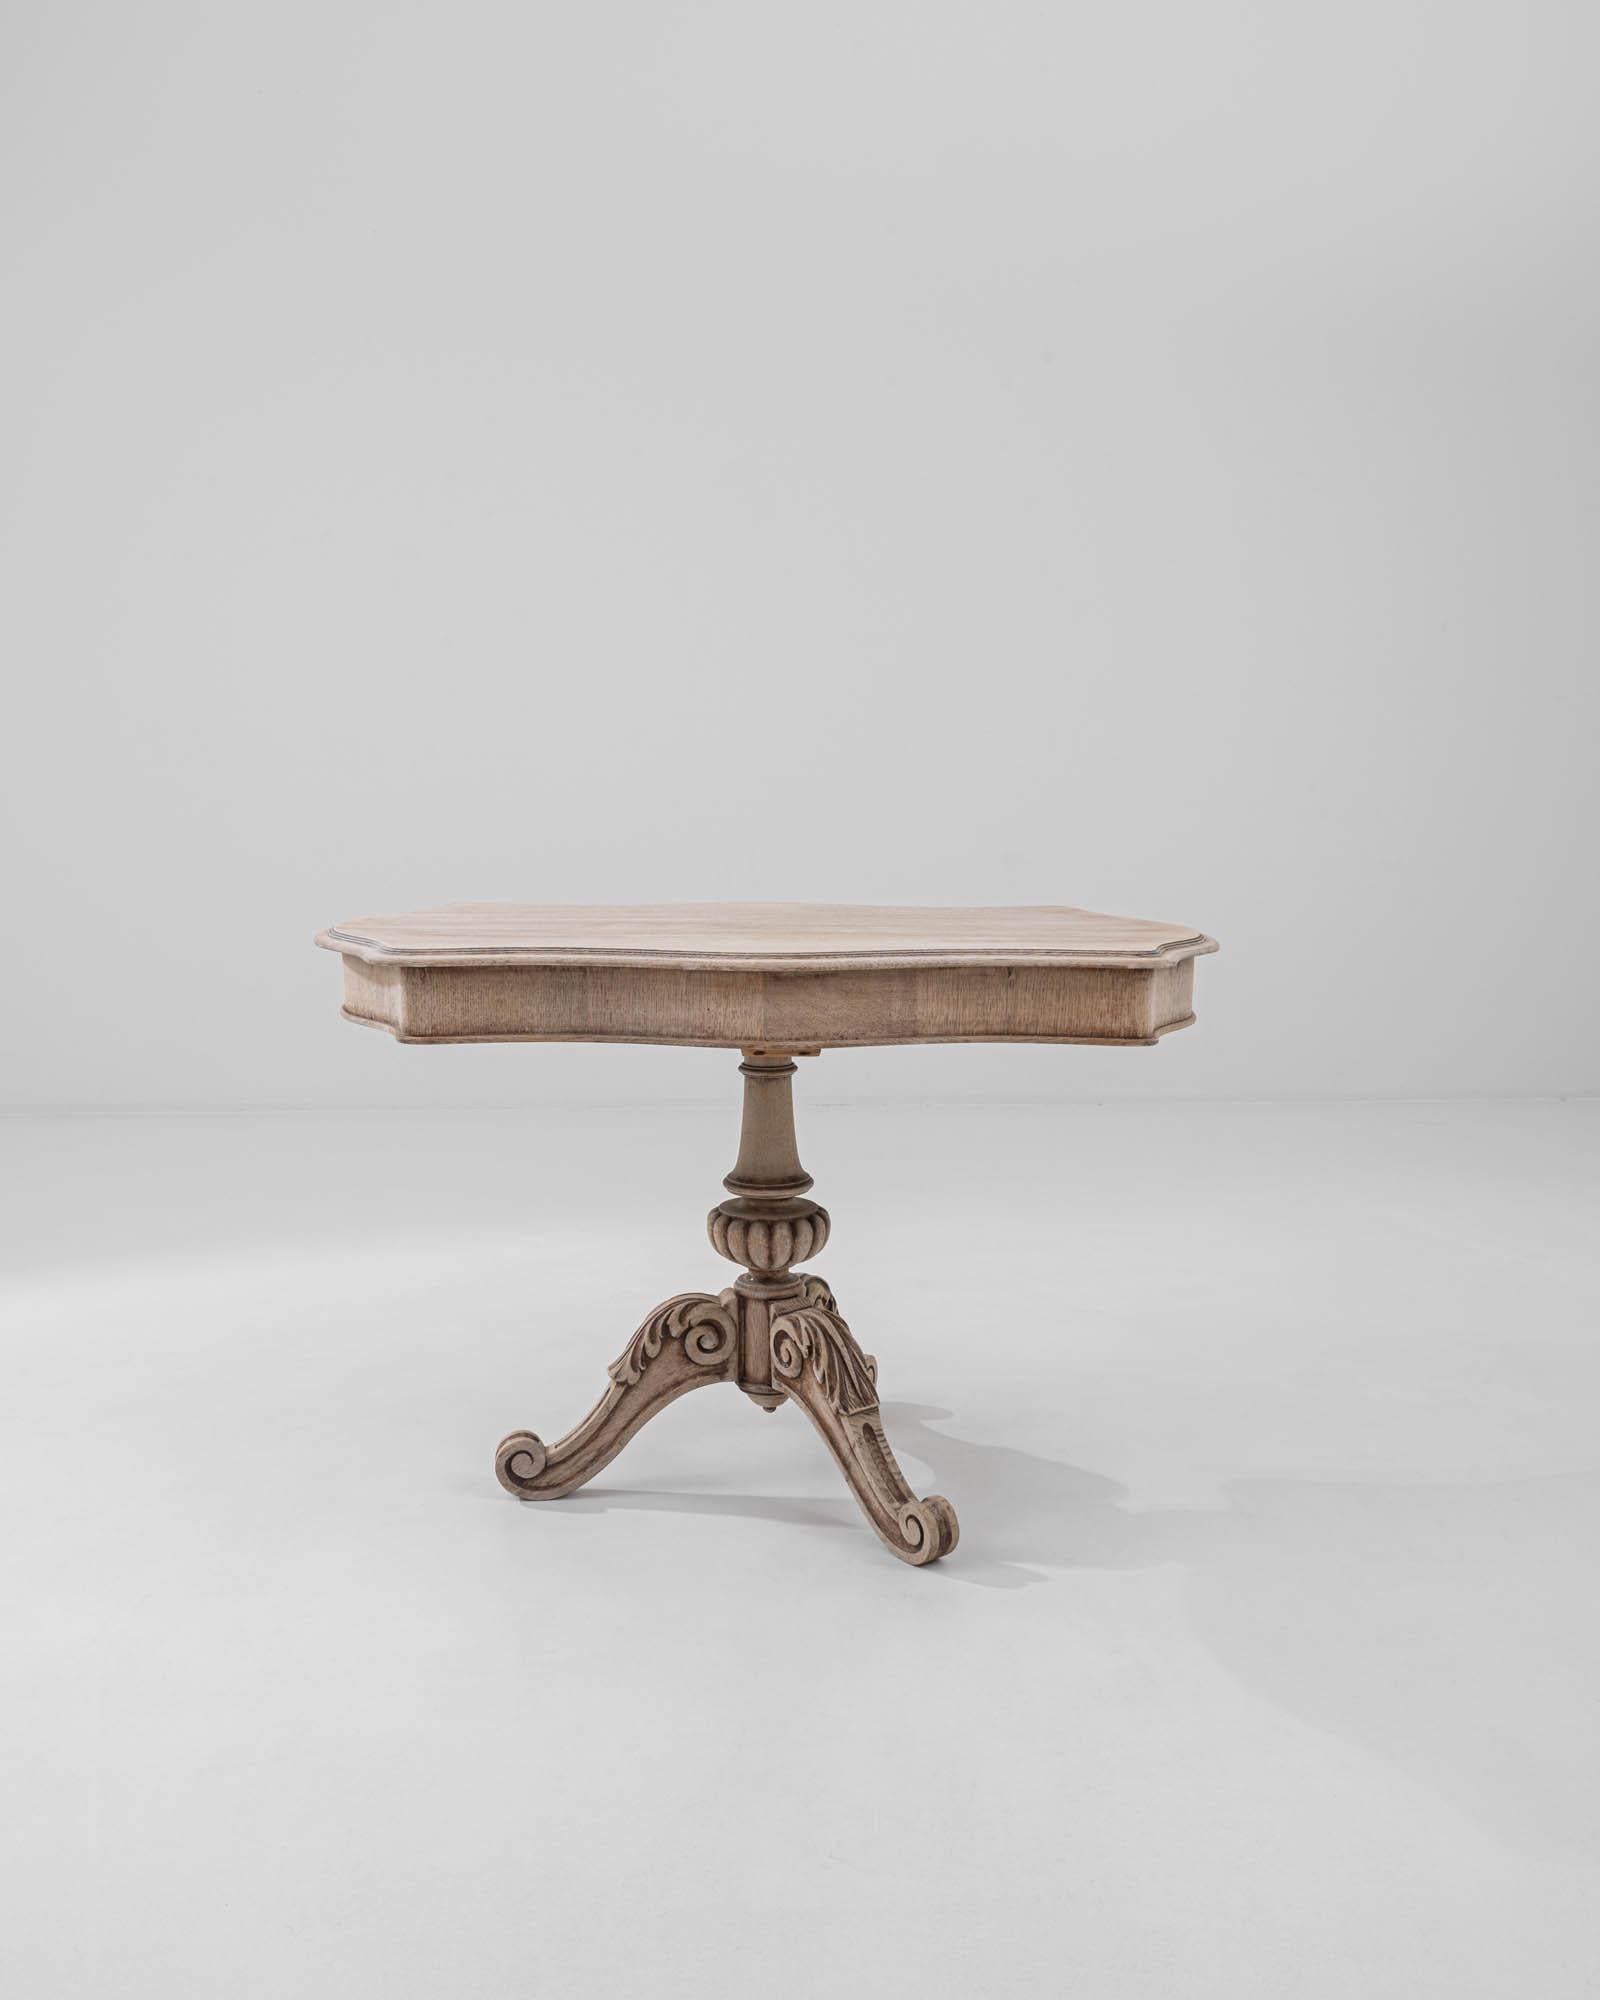 Intricate carvings combined with a distinctive shape give this vintage oak side table a unique appeal. Made in France at the turn of the century, the design takes inspiration from the extravagant forms of Baroque furniture: the graceful contours of